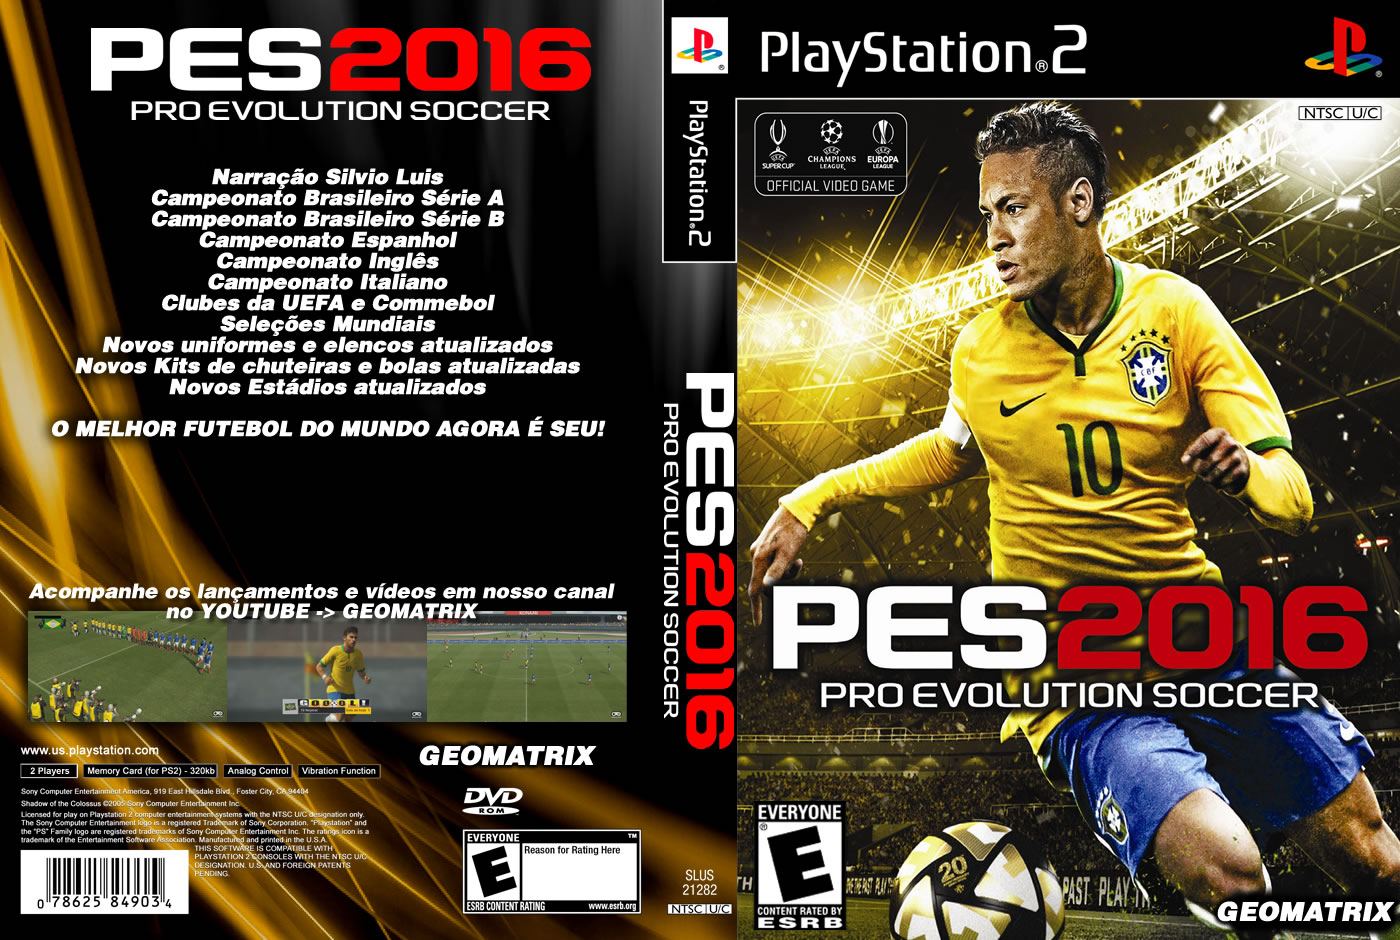 Download image Pro Evolution Soccer 2016 Playstation 2 PC, Android ...